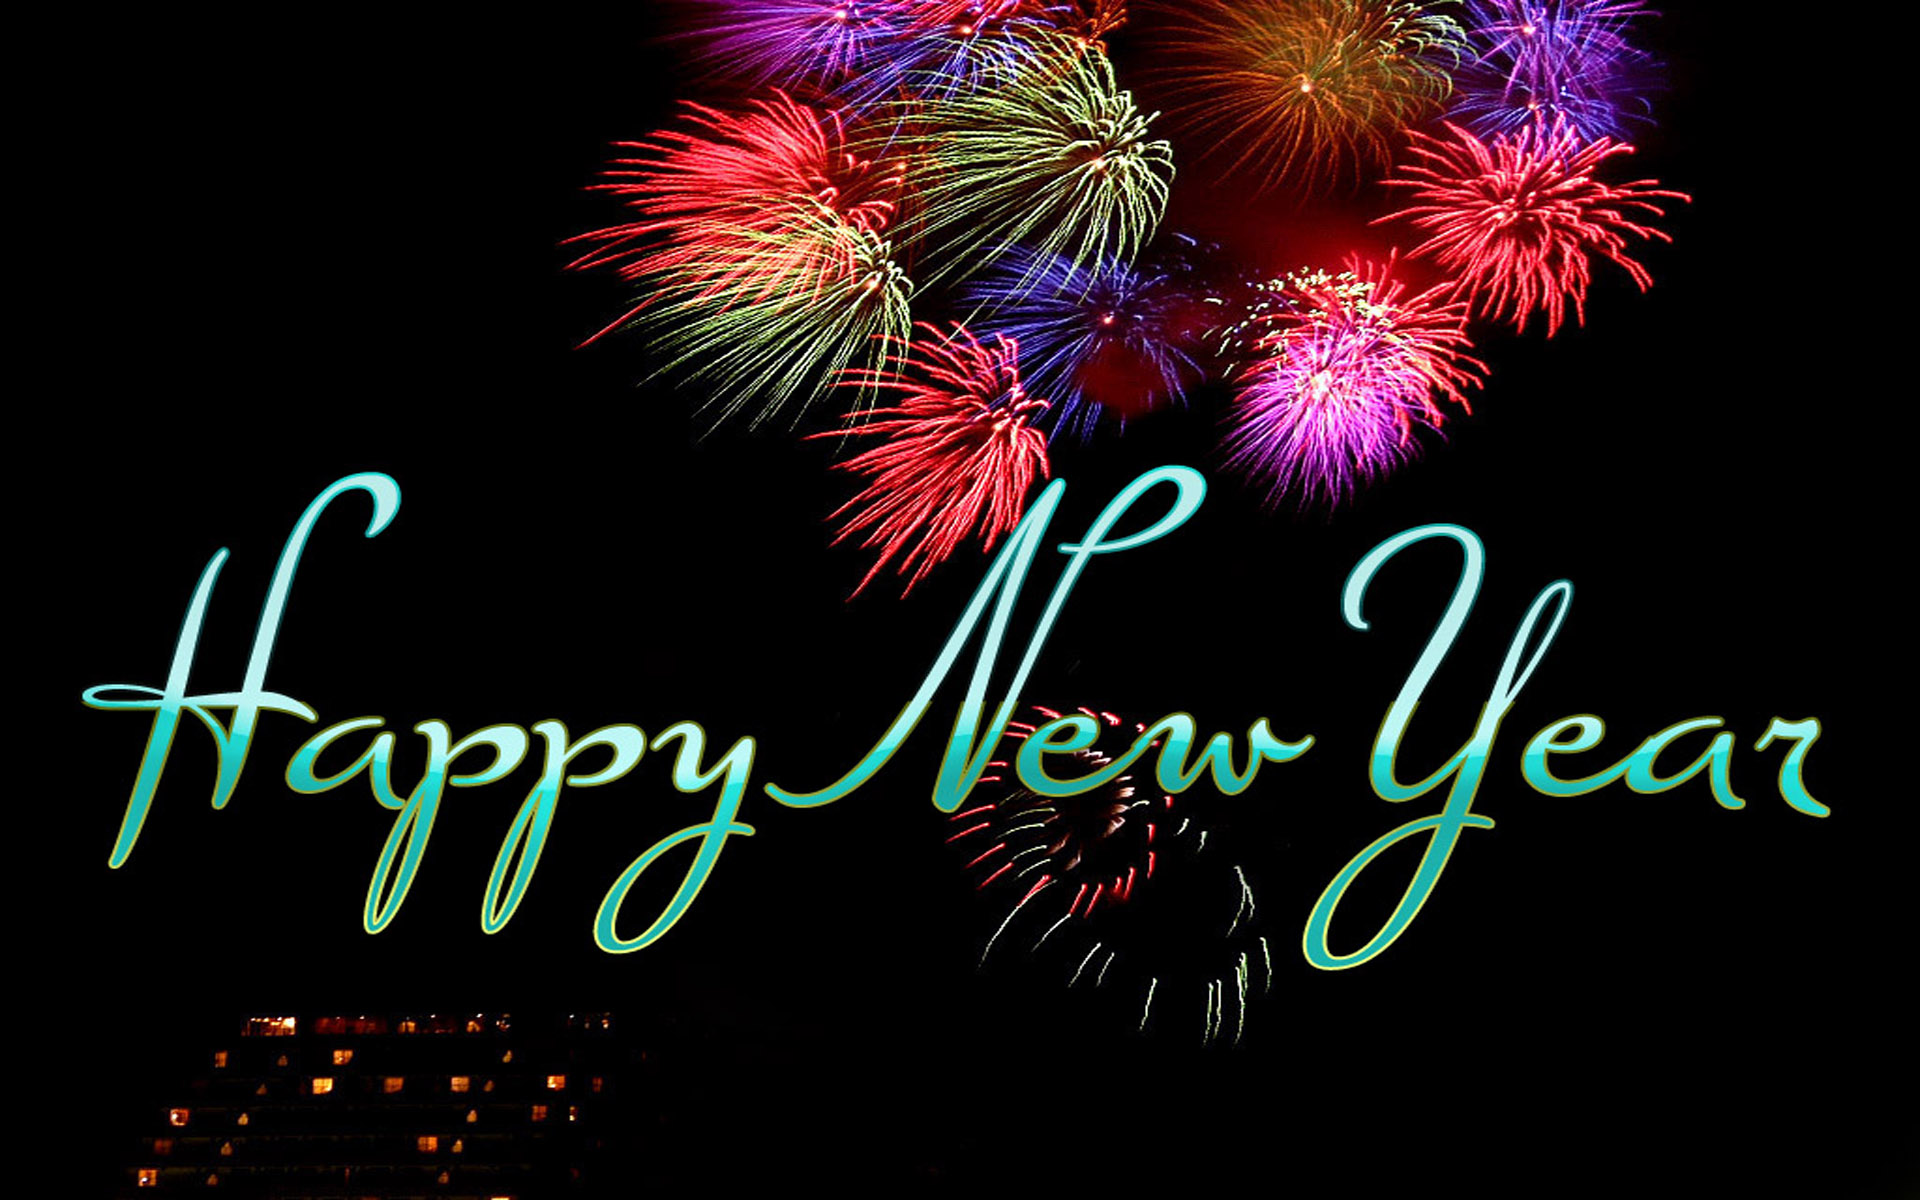 happy new year greetings images 